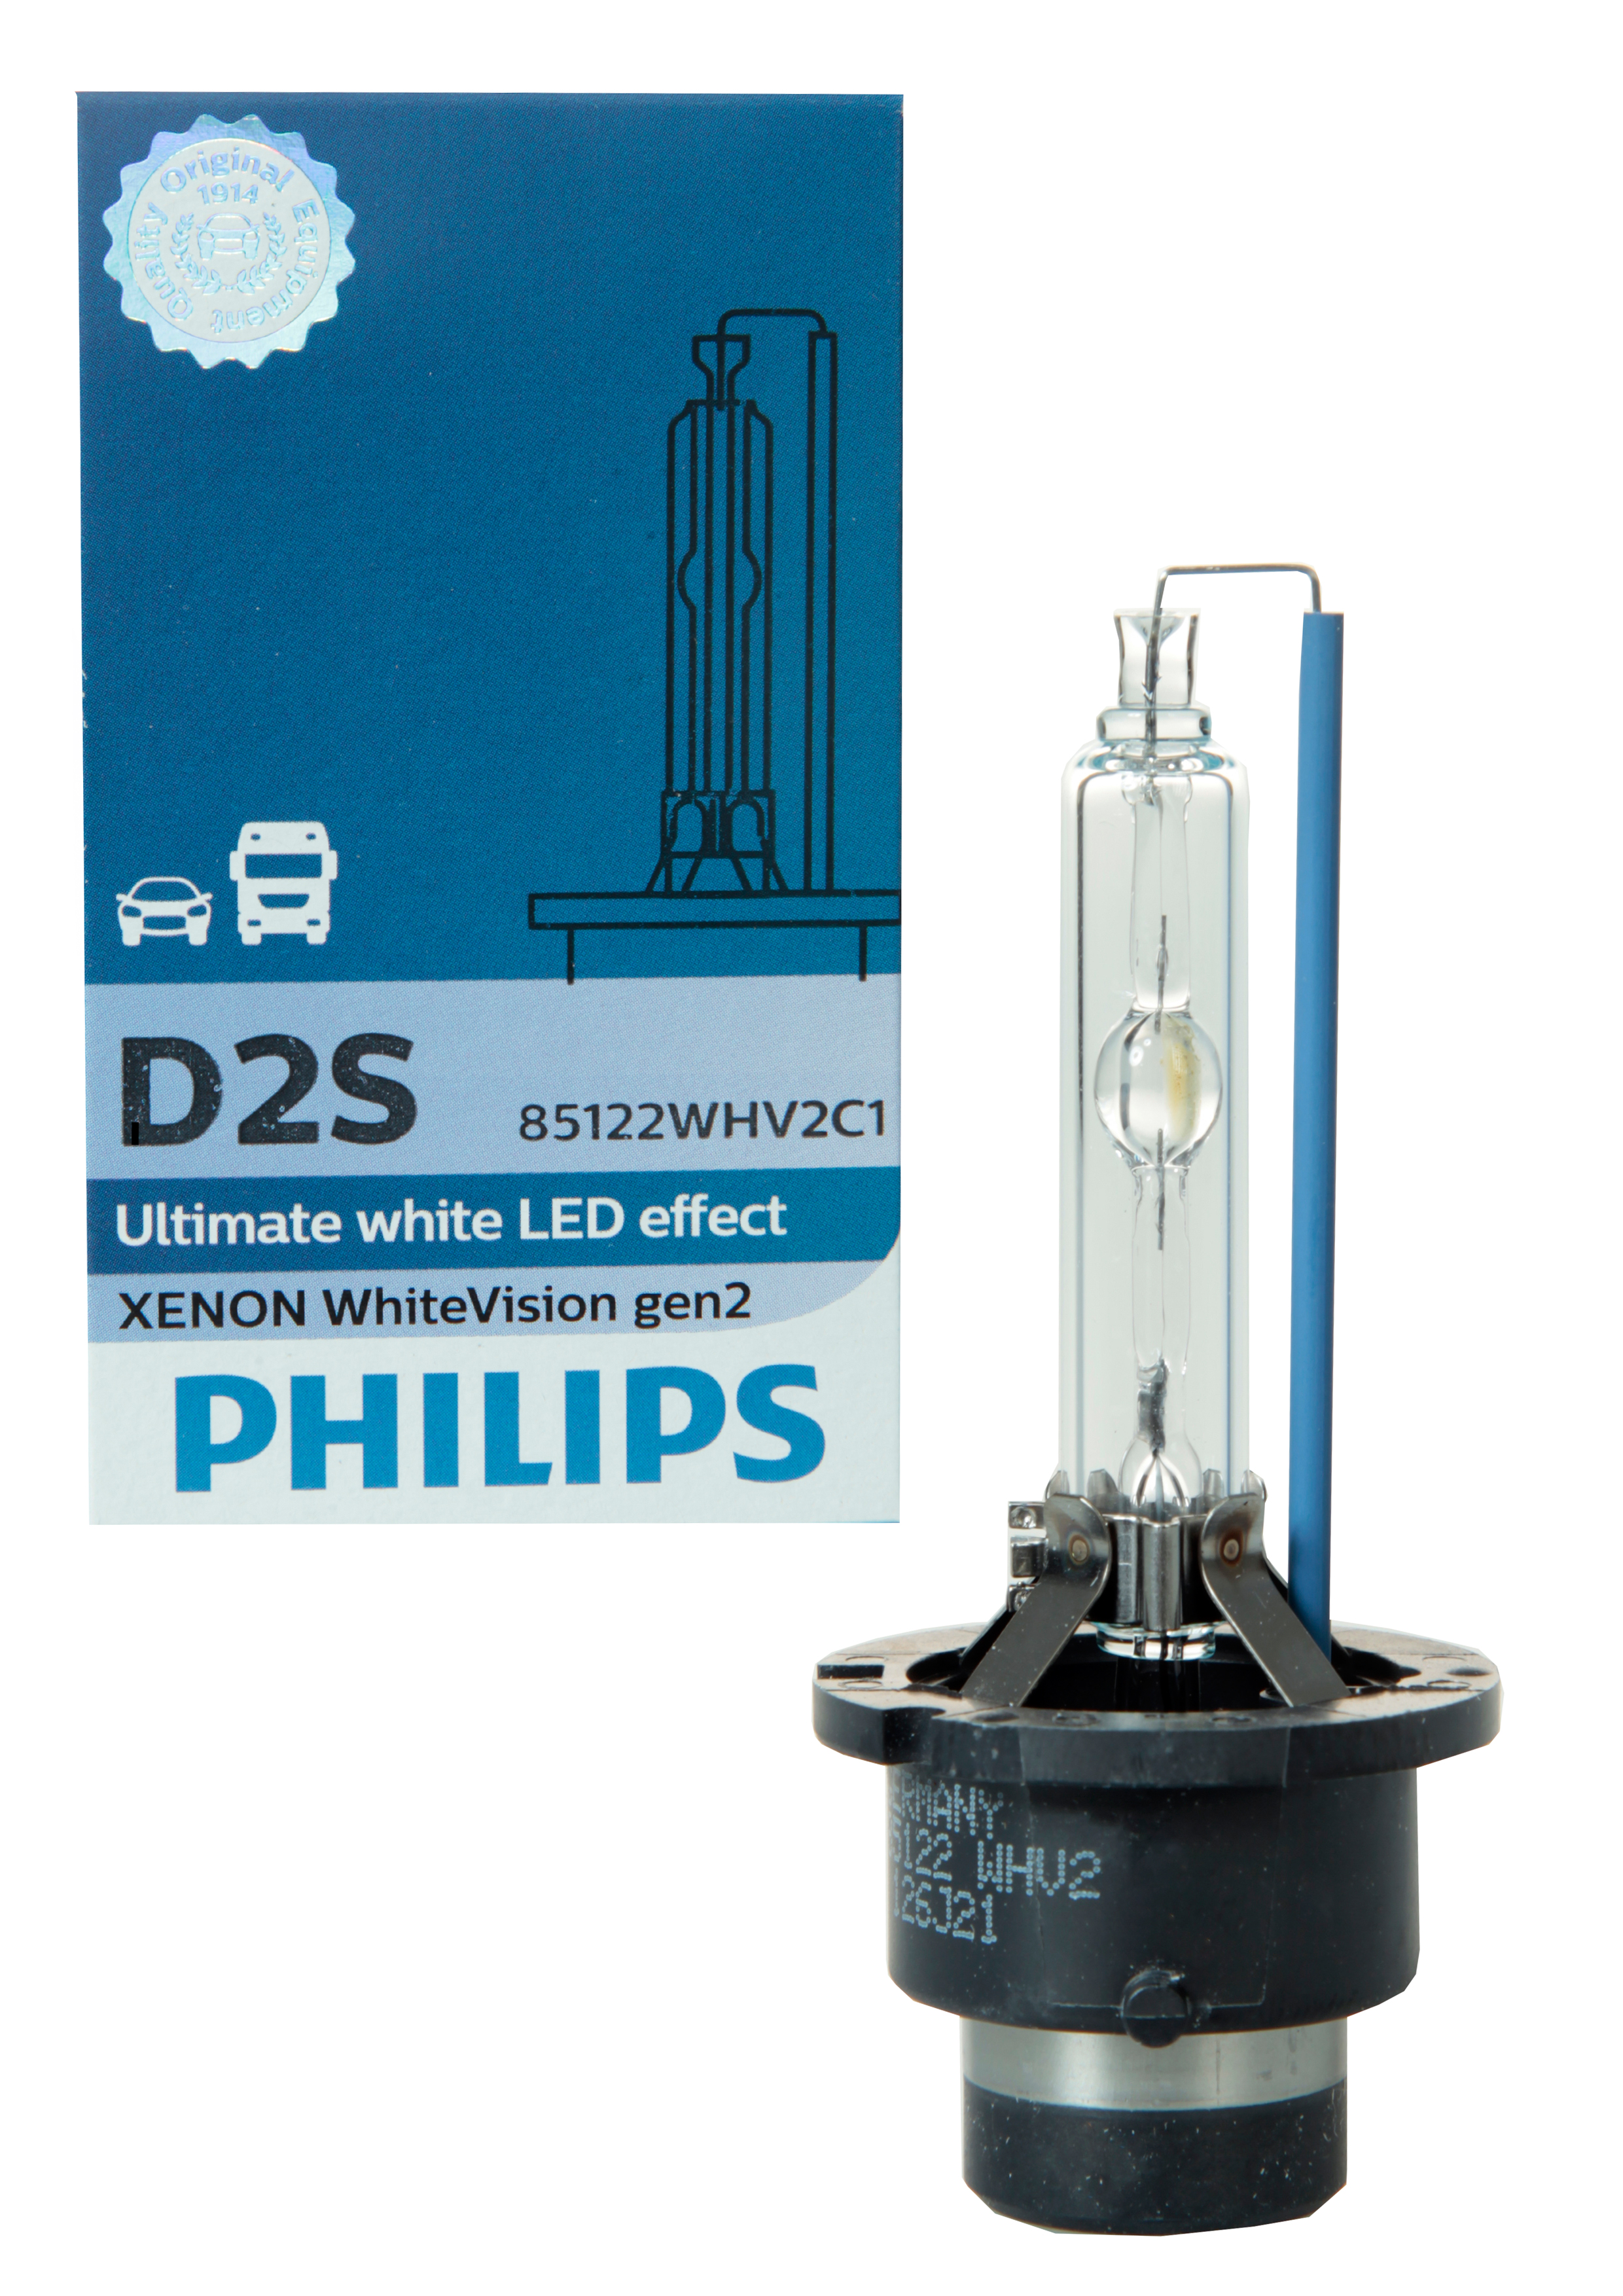 Philips D2S 85122WHV2C1 WhiteVision gen2 Xenon Brenner in C1 Verpackung